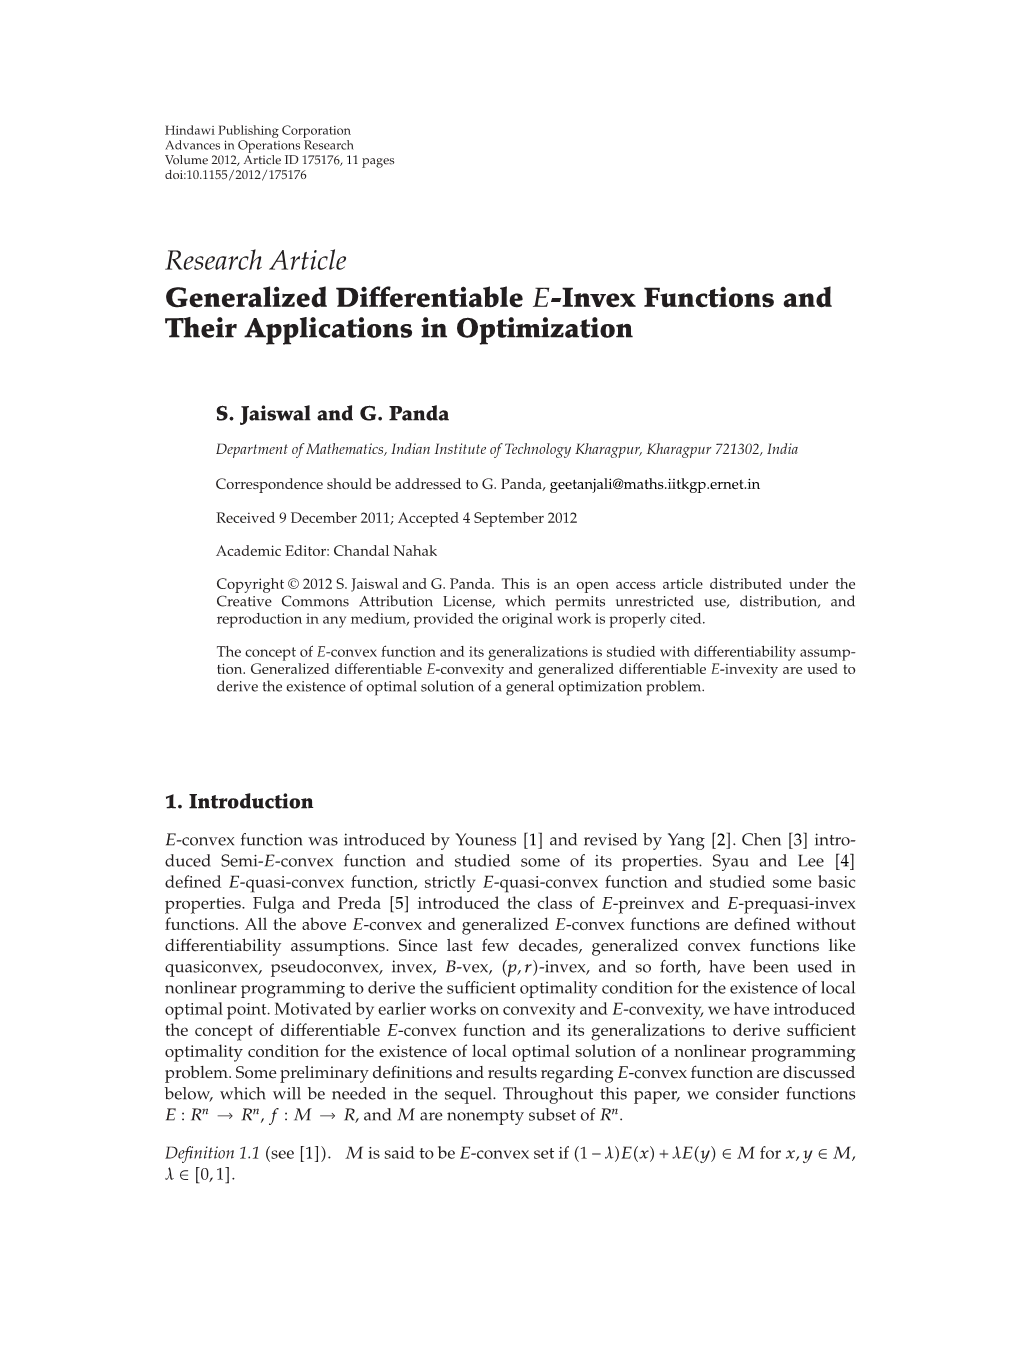 Generalized Differentiable E-Invex Functions and Their Applications in Optimization